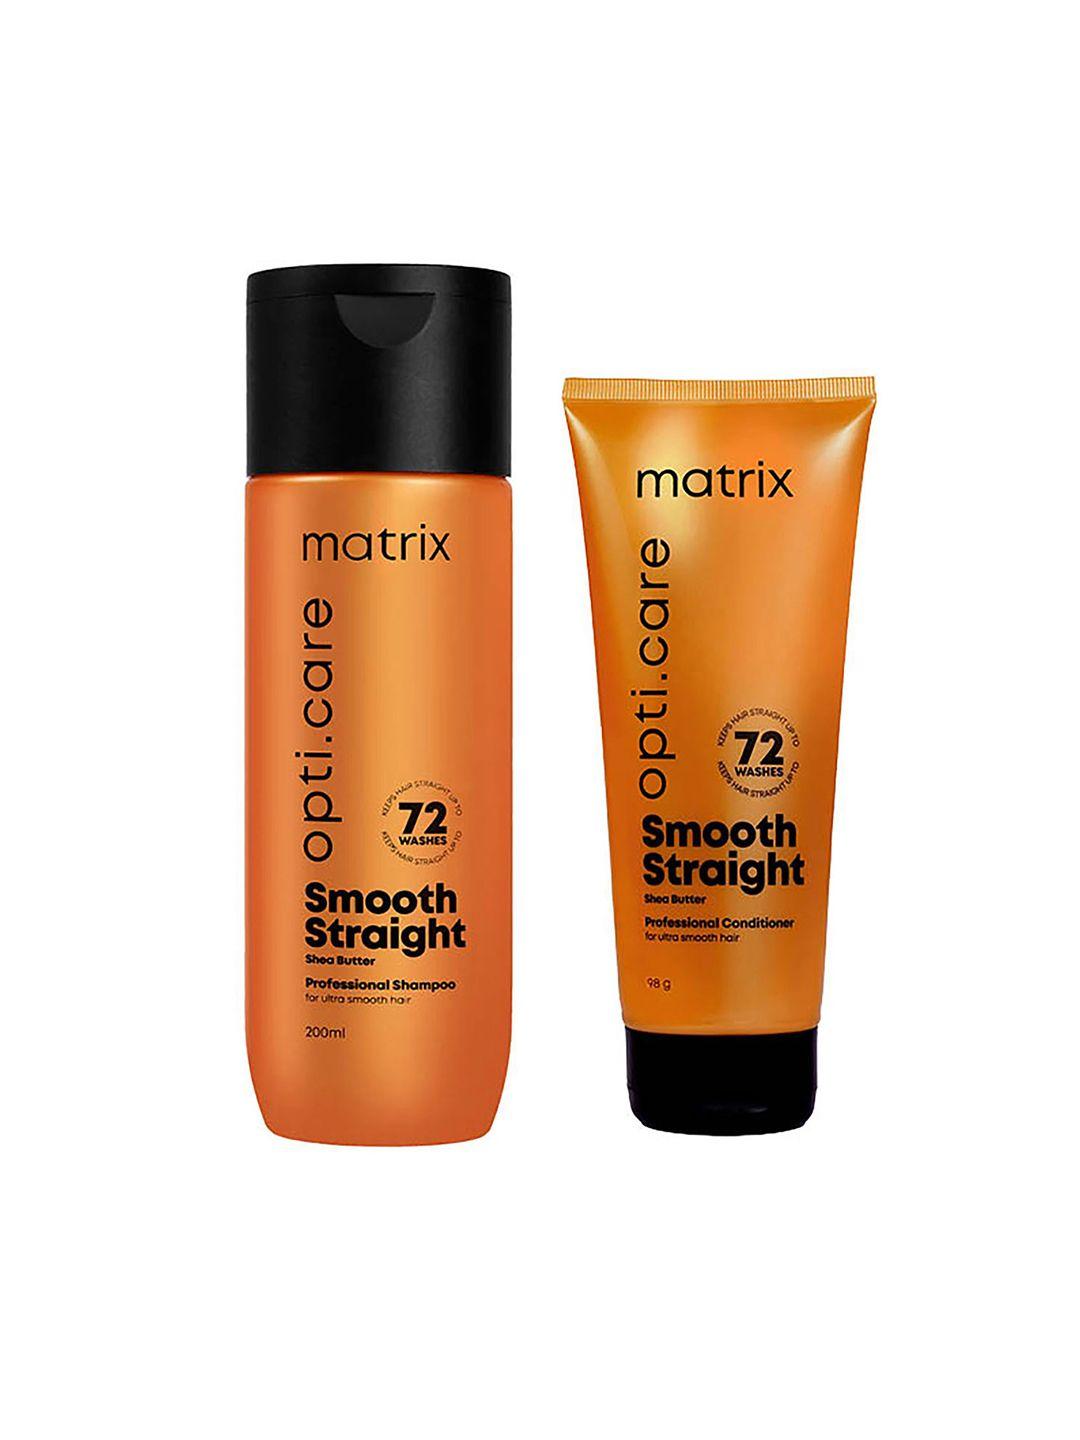 matrix set of opticare shampoo 200 ml + conditioner 98 g with shea butter for dry hair